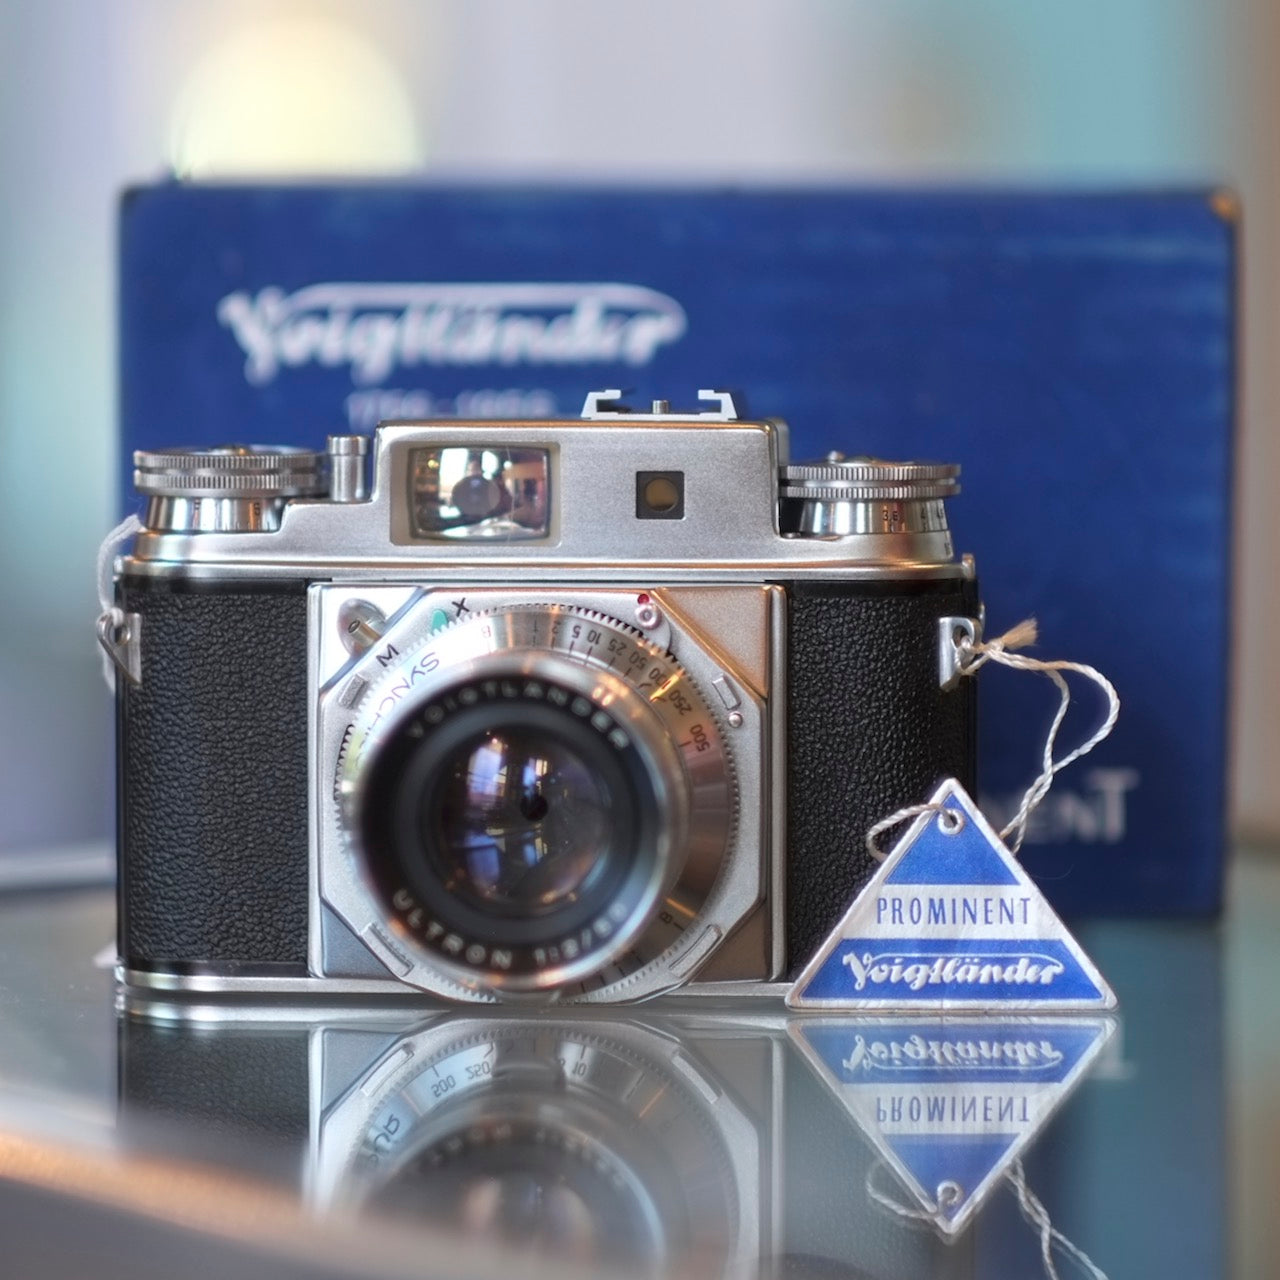 Voigtlander Prominent II with 50mm f2 Ultron